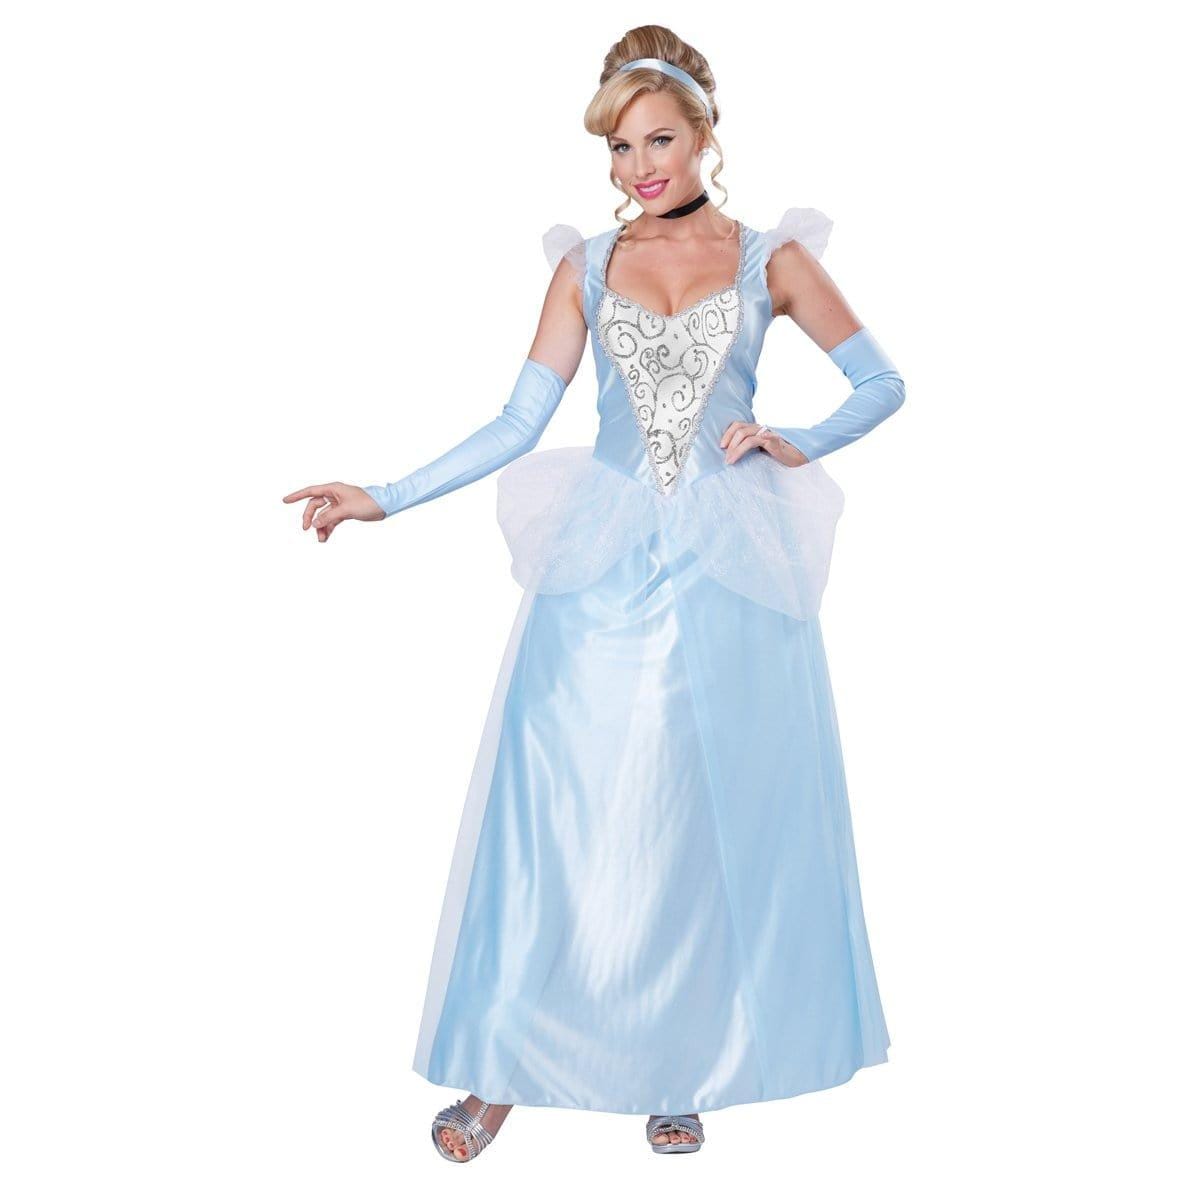 Buy Costumes Cinderella Costume for Adults, Cinderella sold at Party Expert